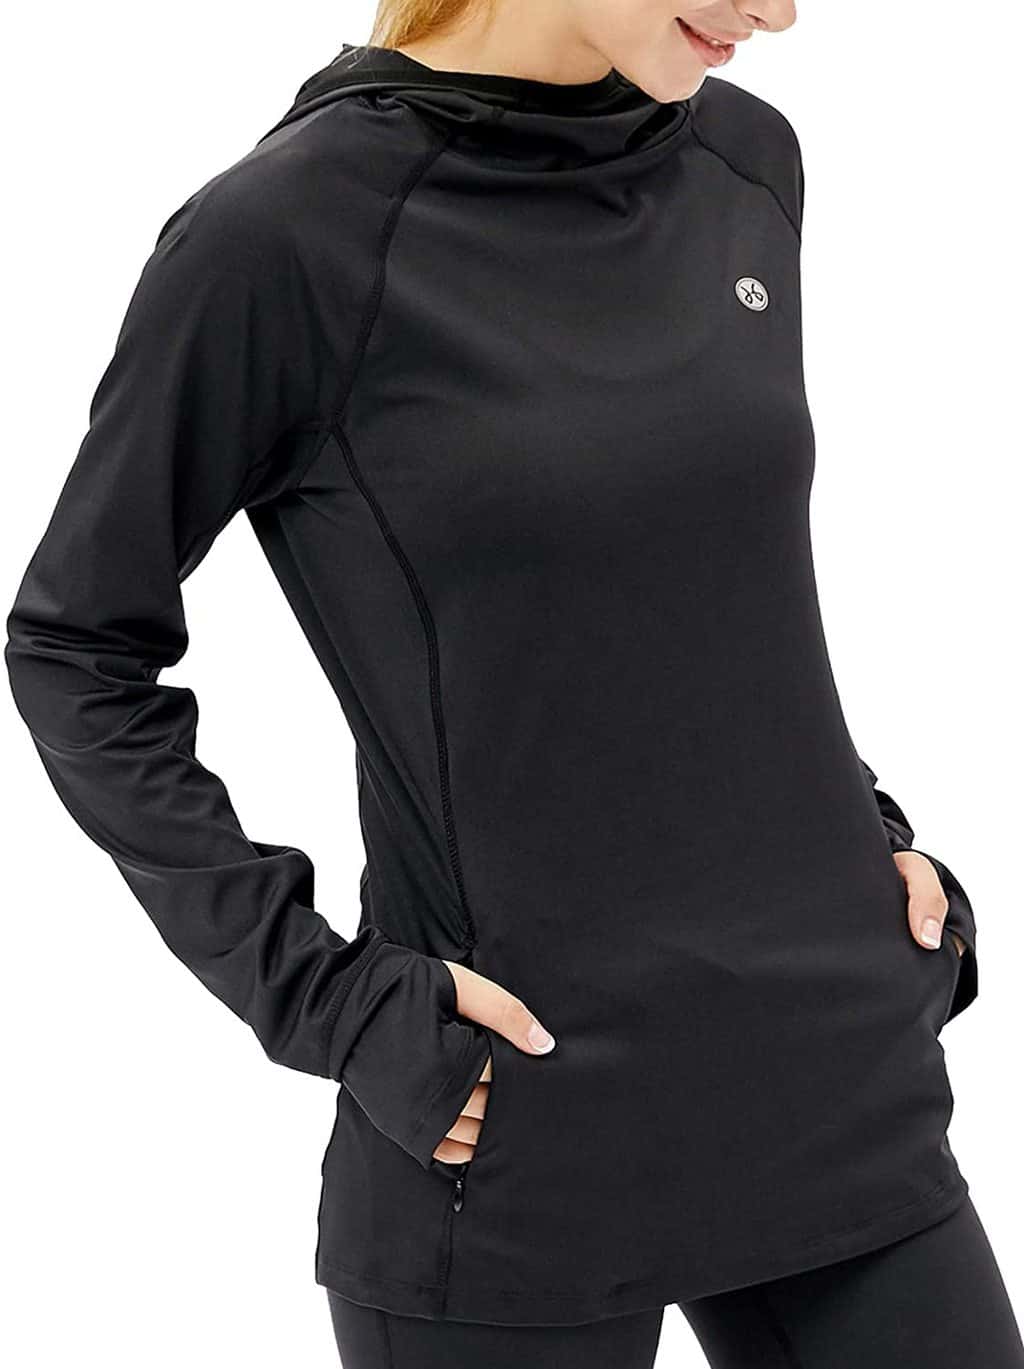 hmiles womens athletic hoodie black colour, isolated on white background